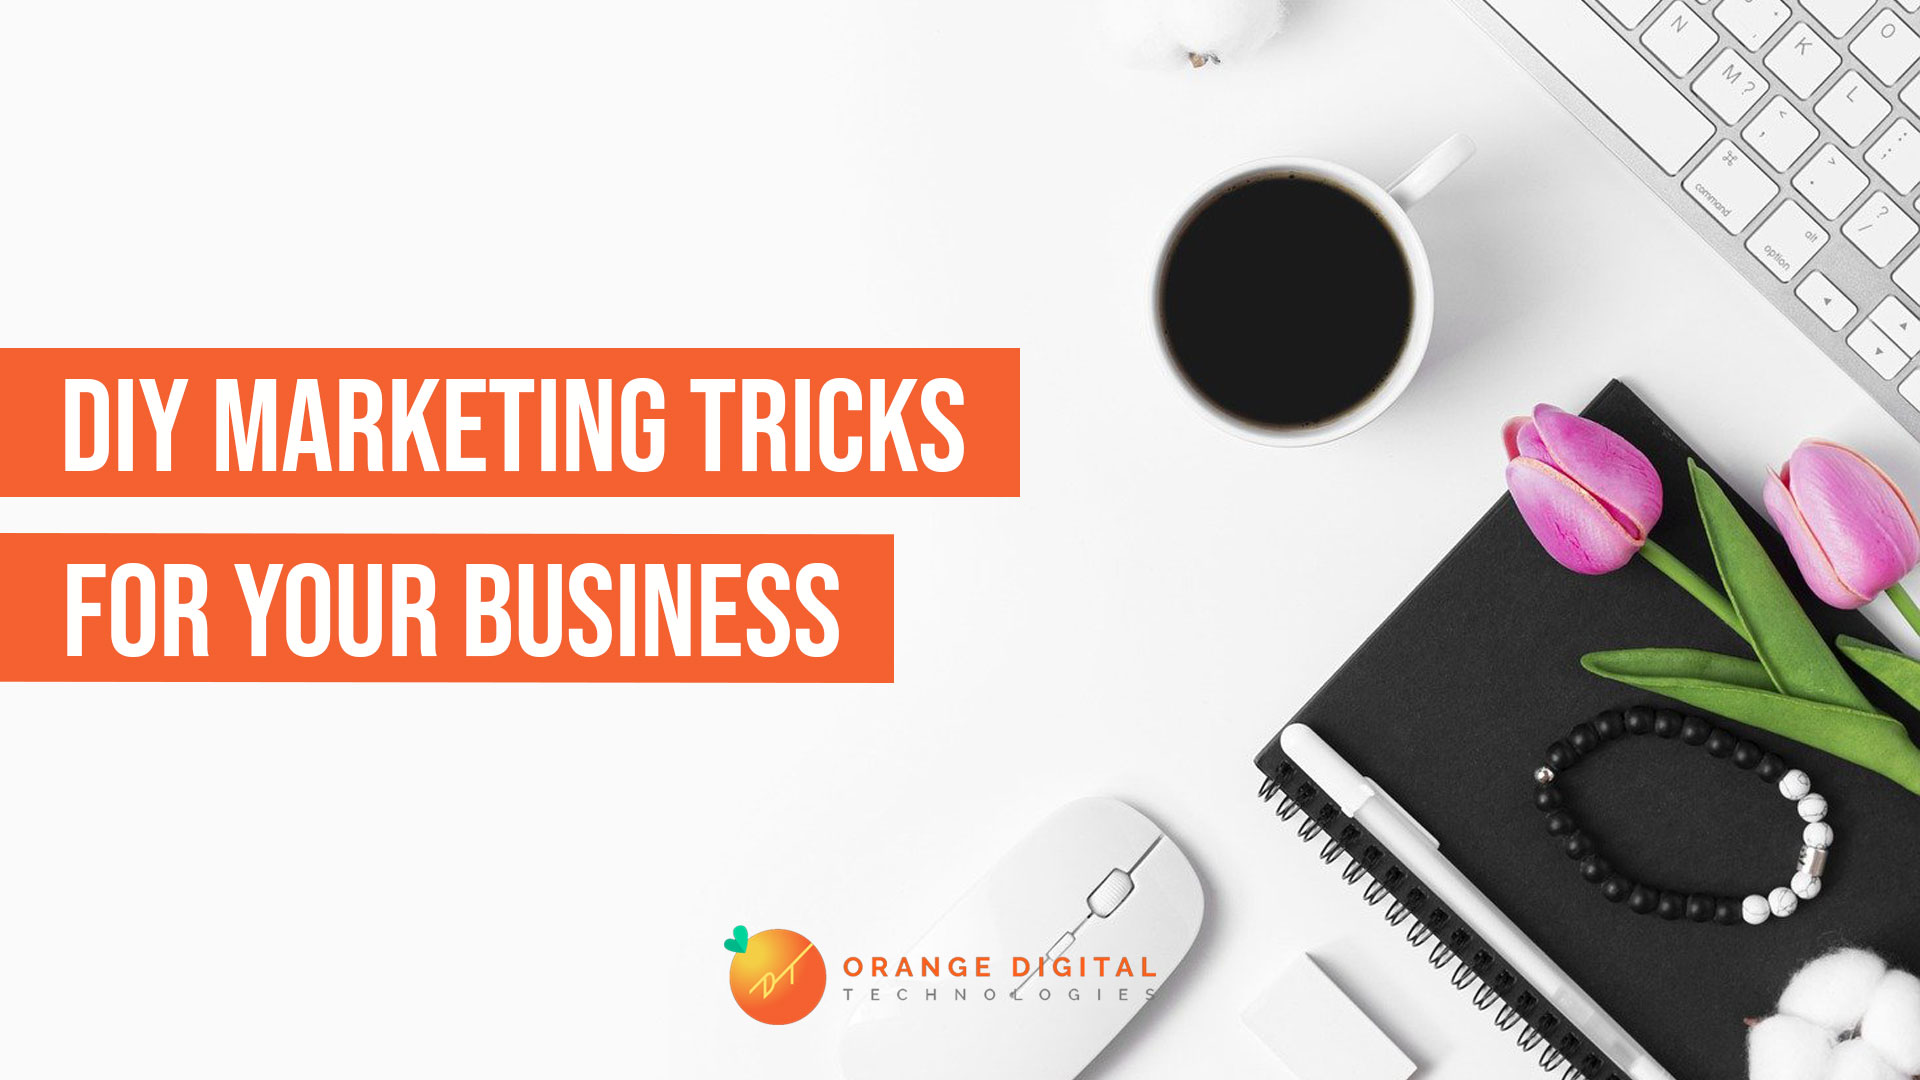 DIY Marketing Tricks for Your Business